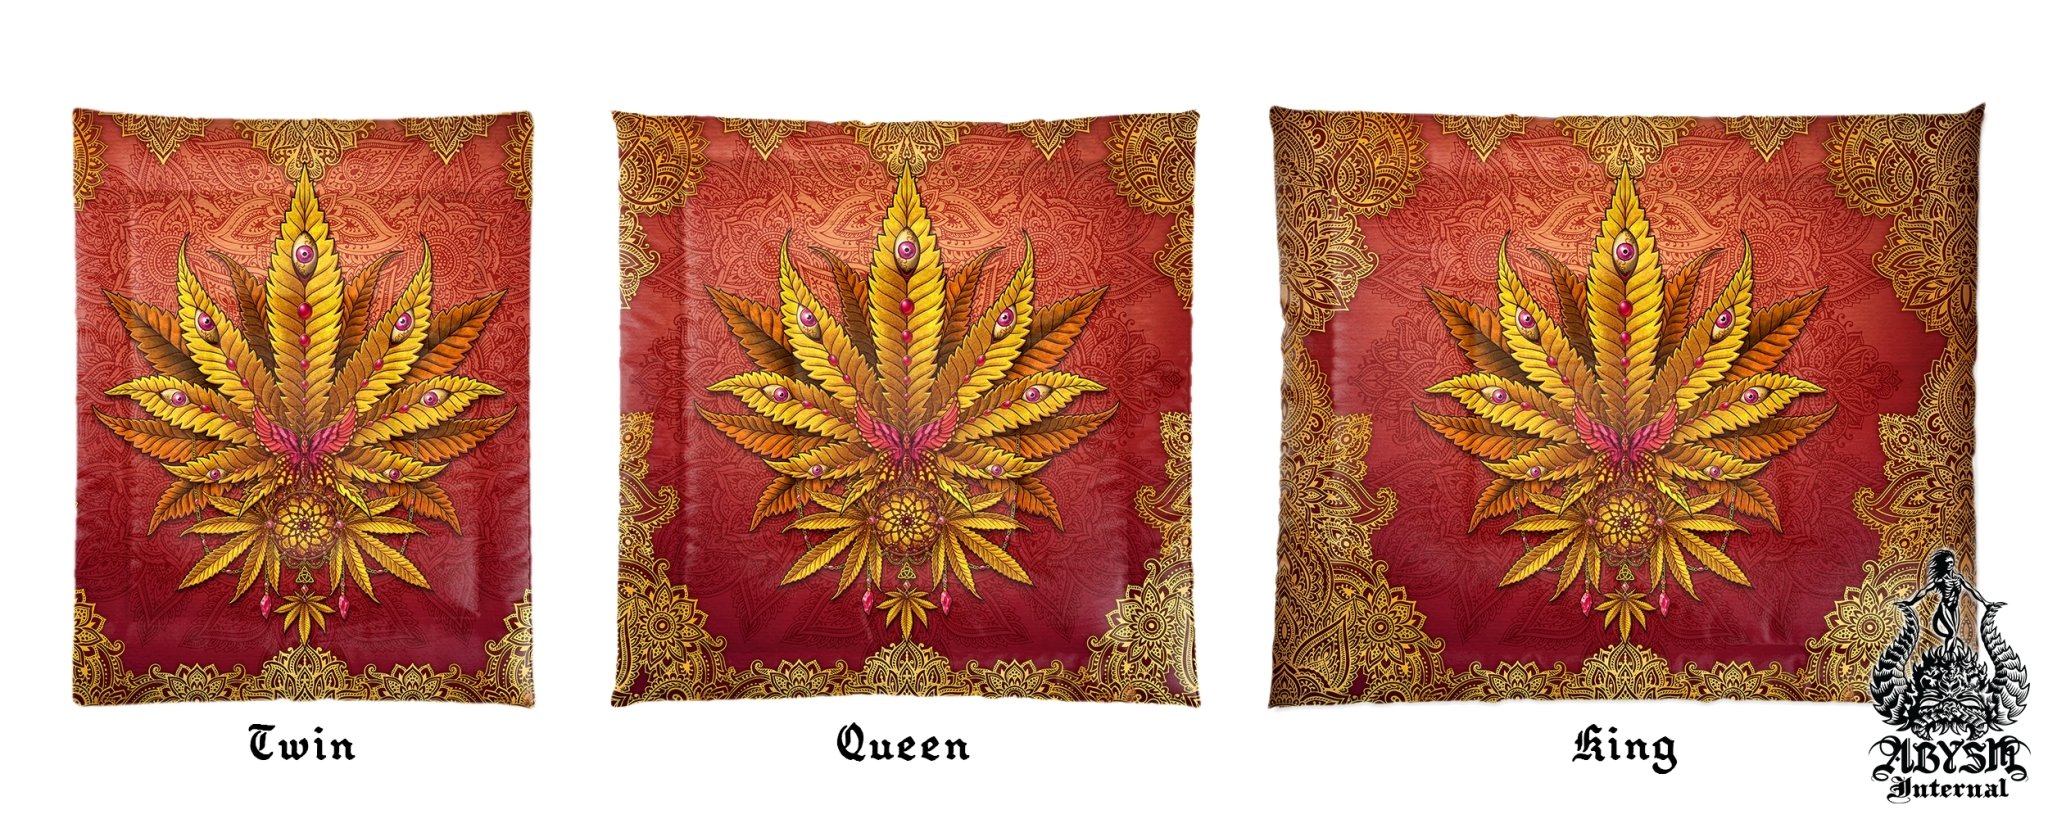 Weed Bedding Set, Comforter and Duvet, Cannabis Bed Cover, Marijuana Hippie Bedroom Decor, King, Queen and Twin Size, Indie 420 Room Art - Boho, Mandalas - Abysm Internal